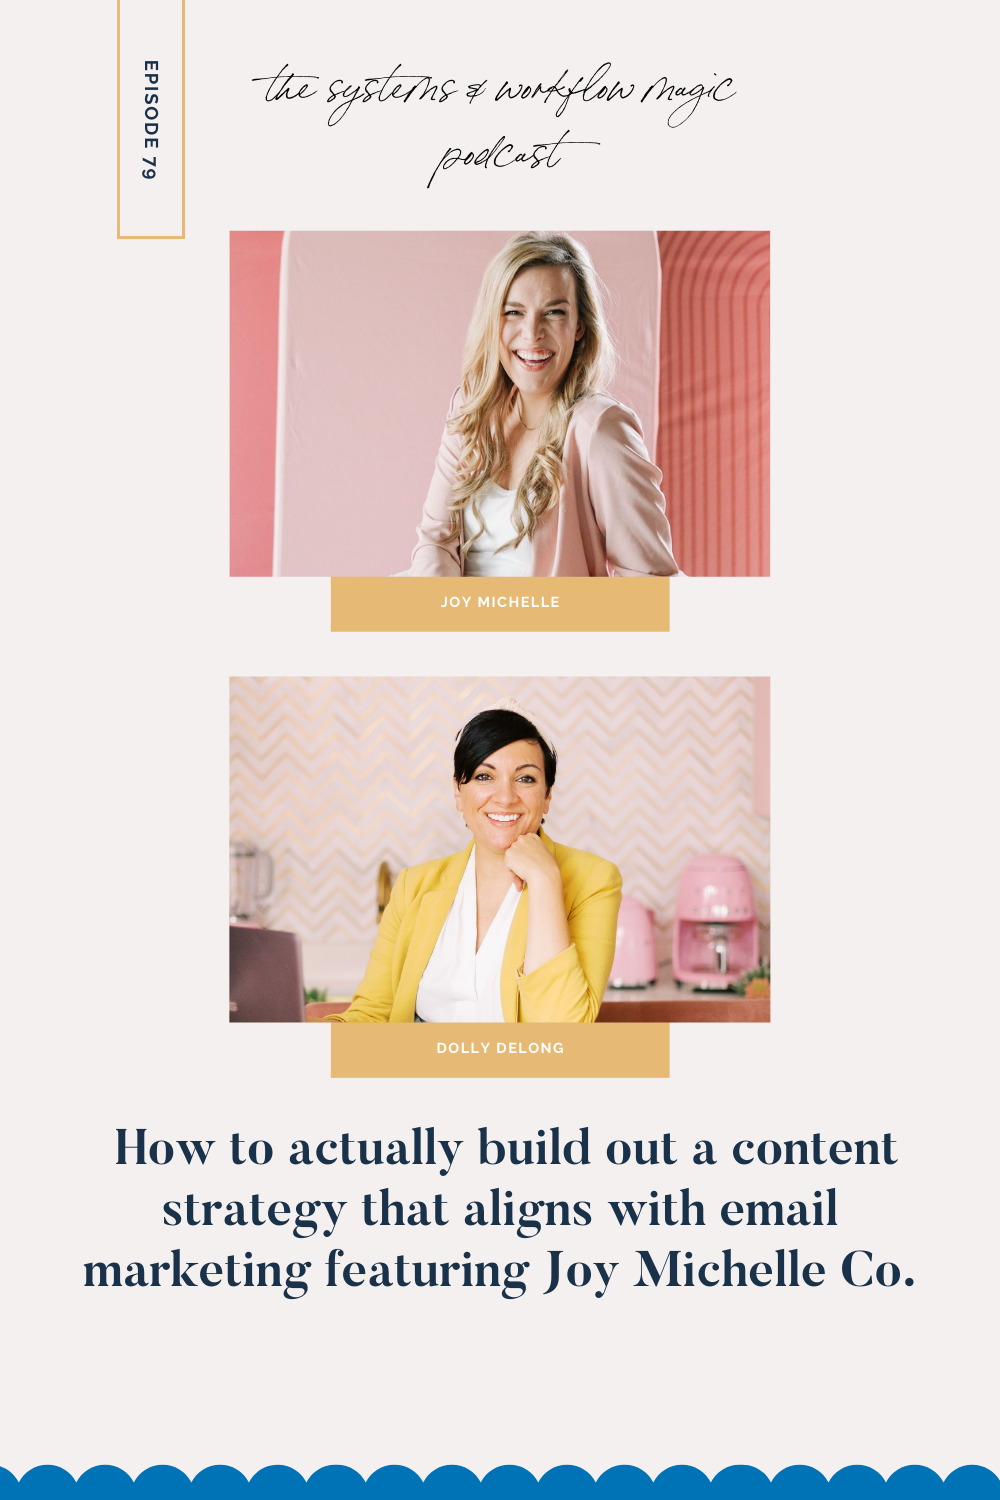 79: How to Build Out a Content Strategy that Aligns with Email Marketing featuring Joy Michelle